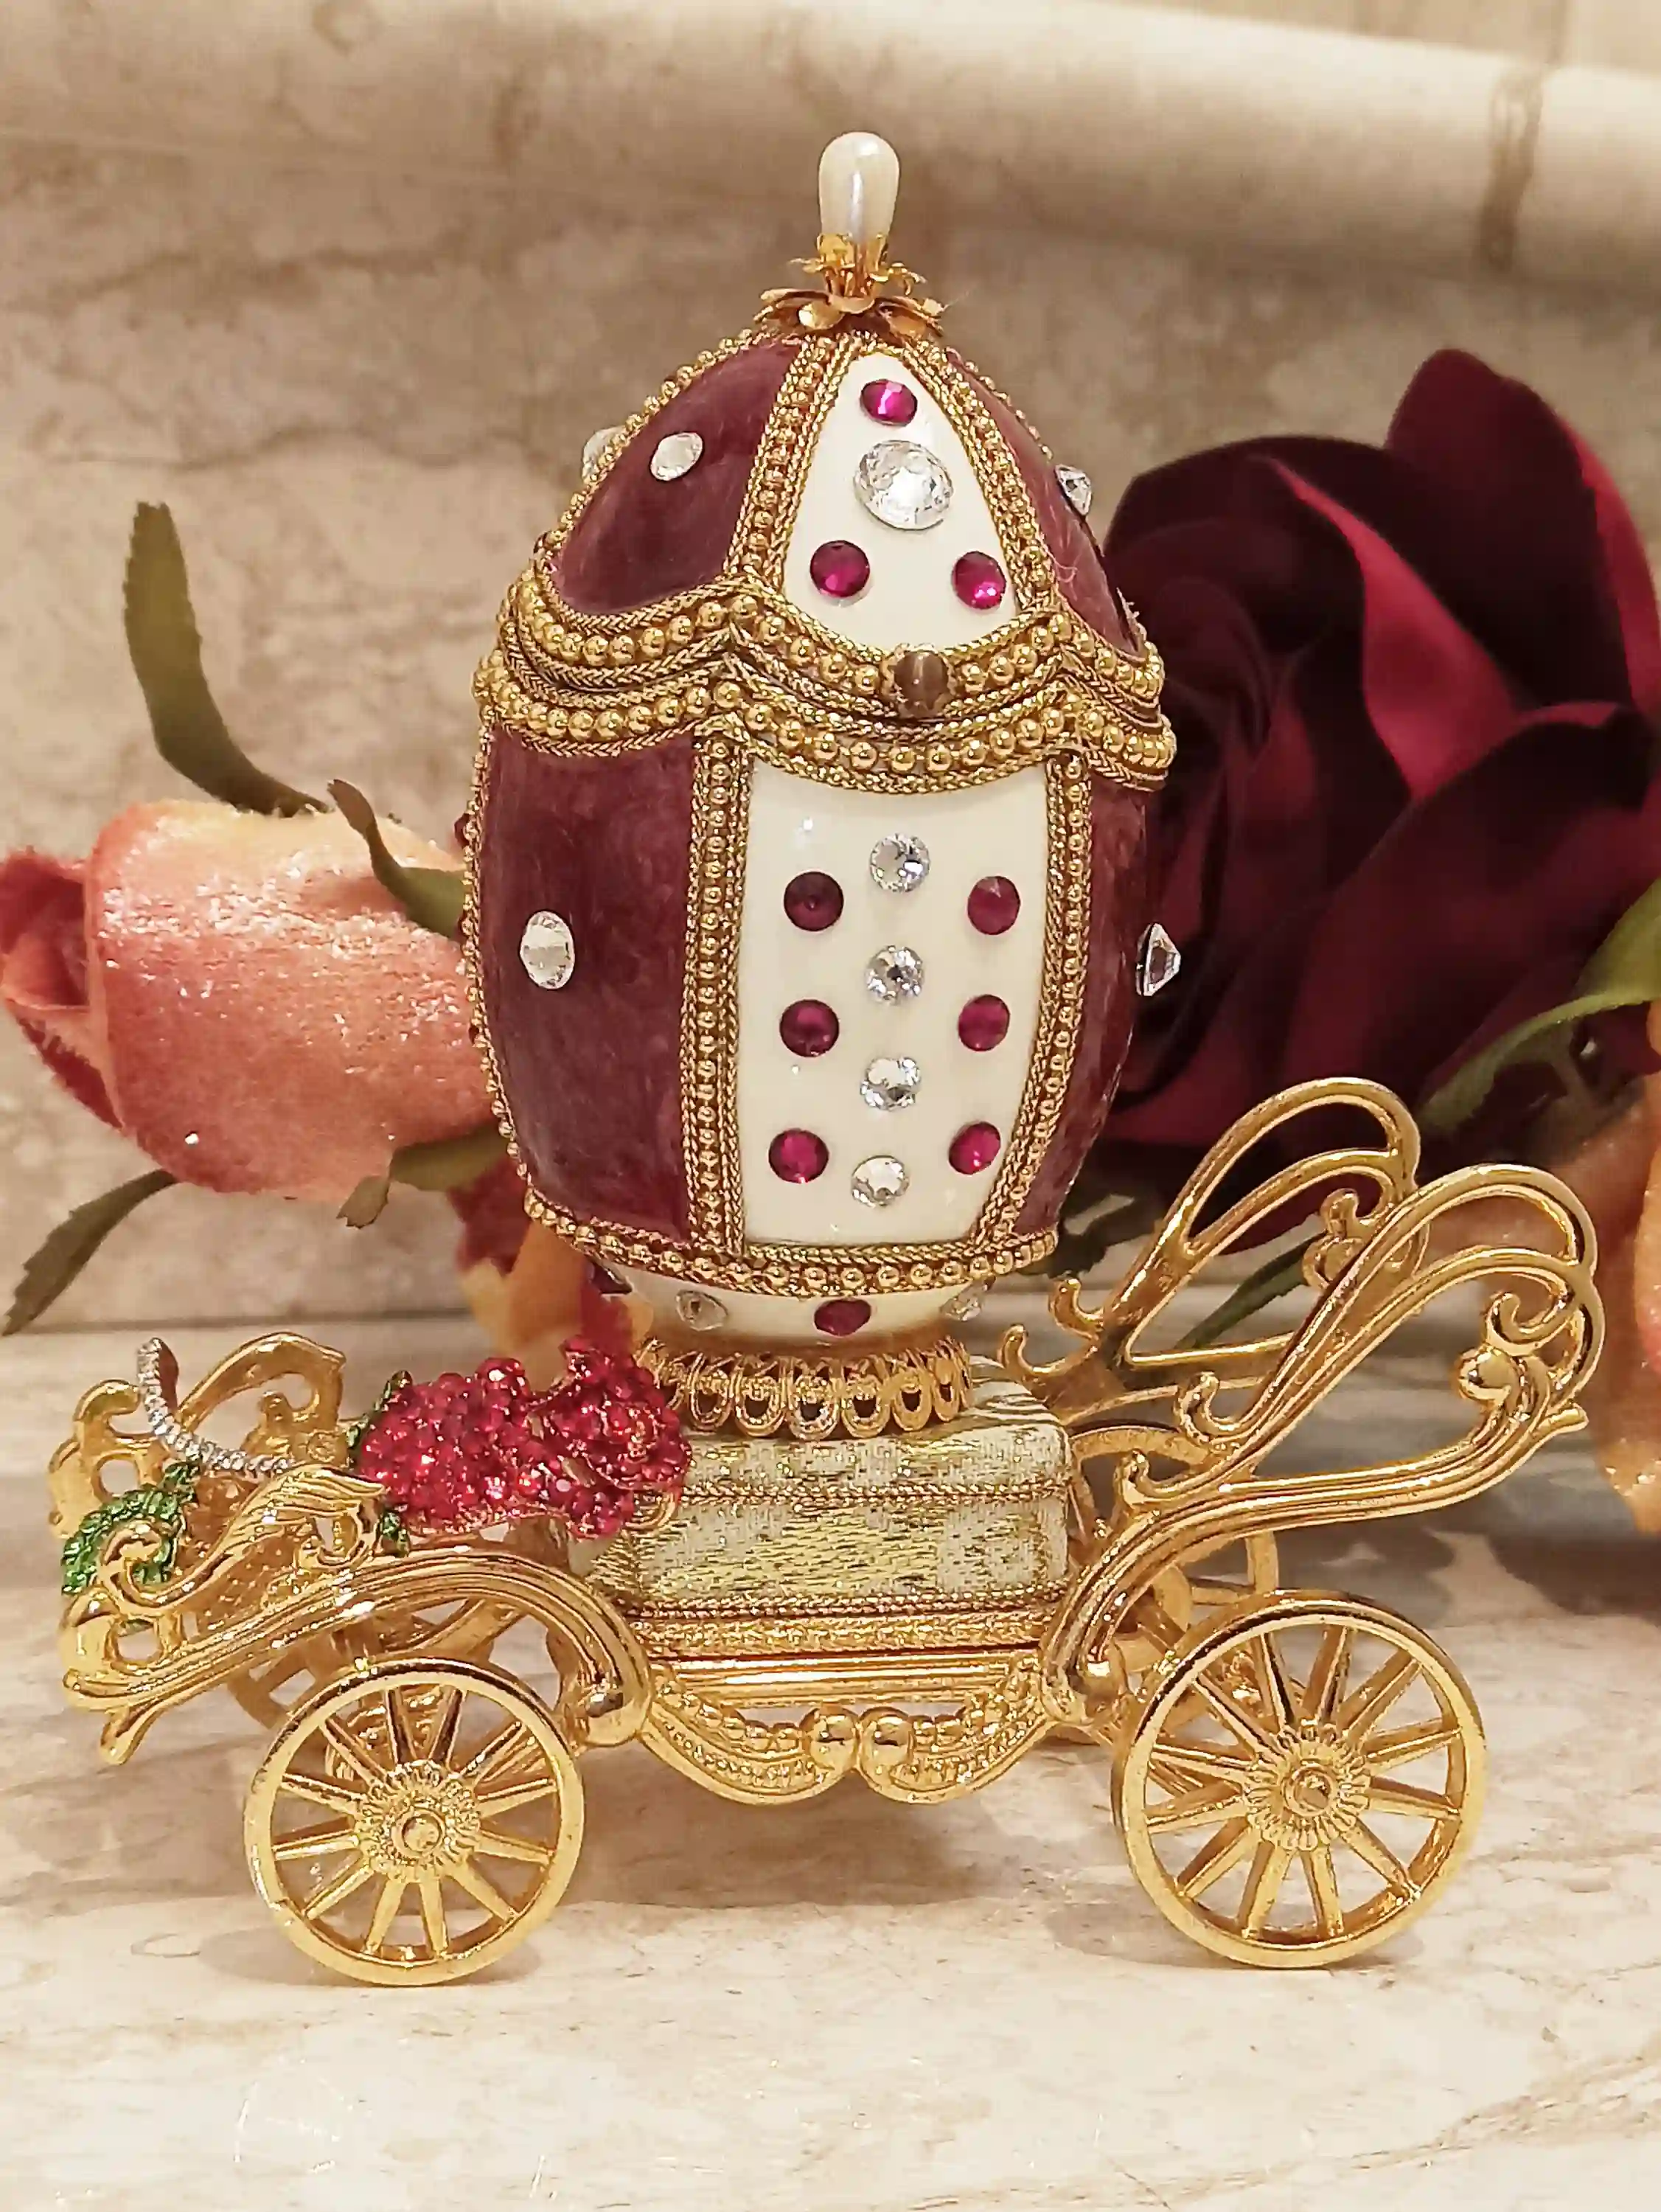 One Of a Kind Faberge Egg style First Anniversary gift for wife Royal Carriage Faberge egg Trinket Box Musical Jewelry box Faberge 24kGold 